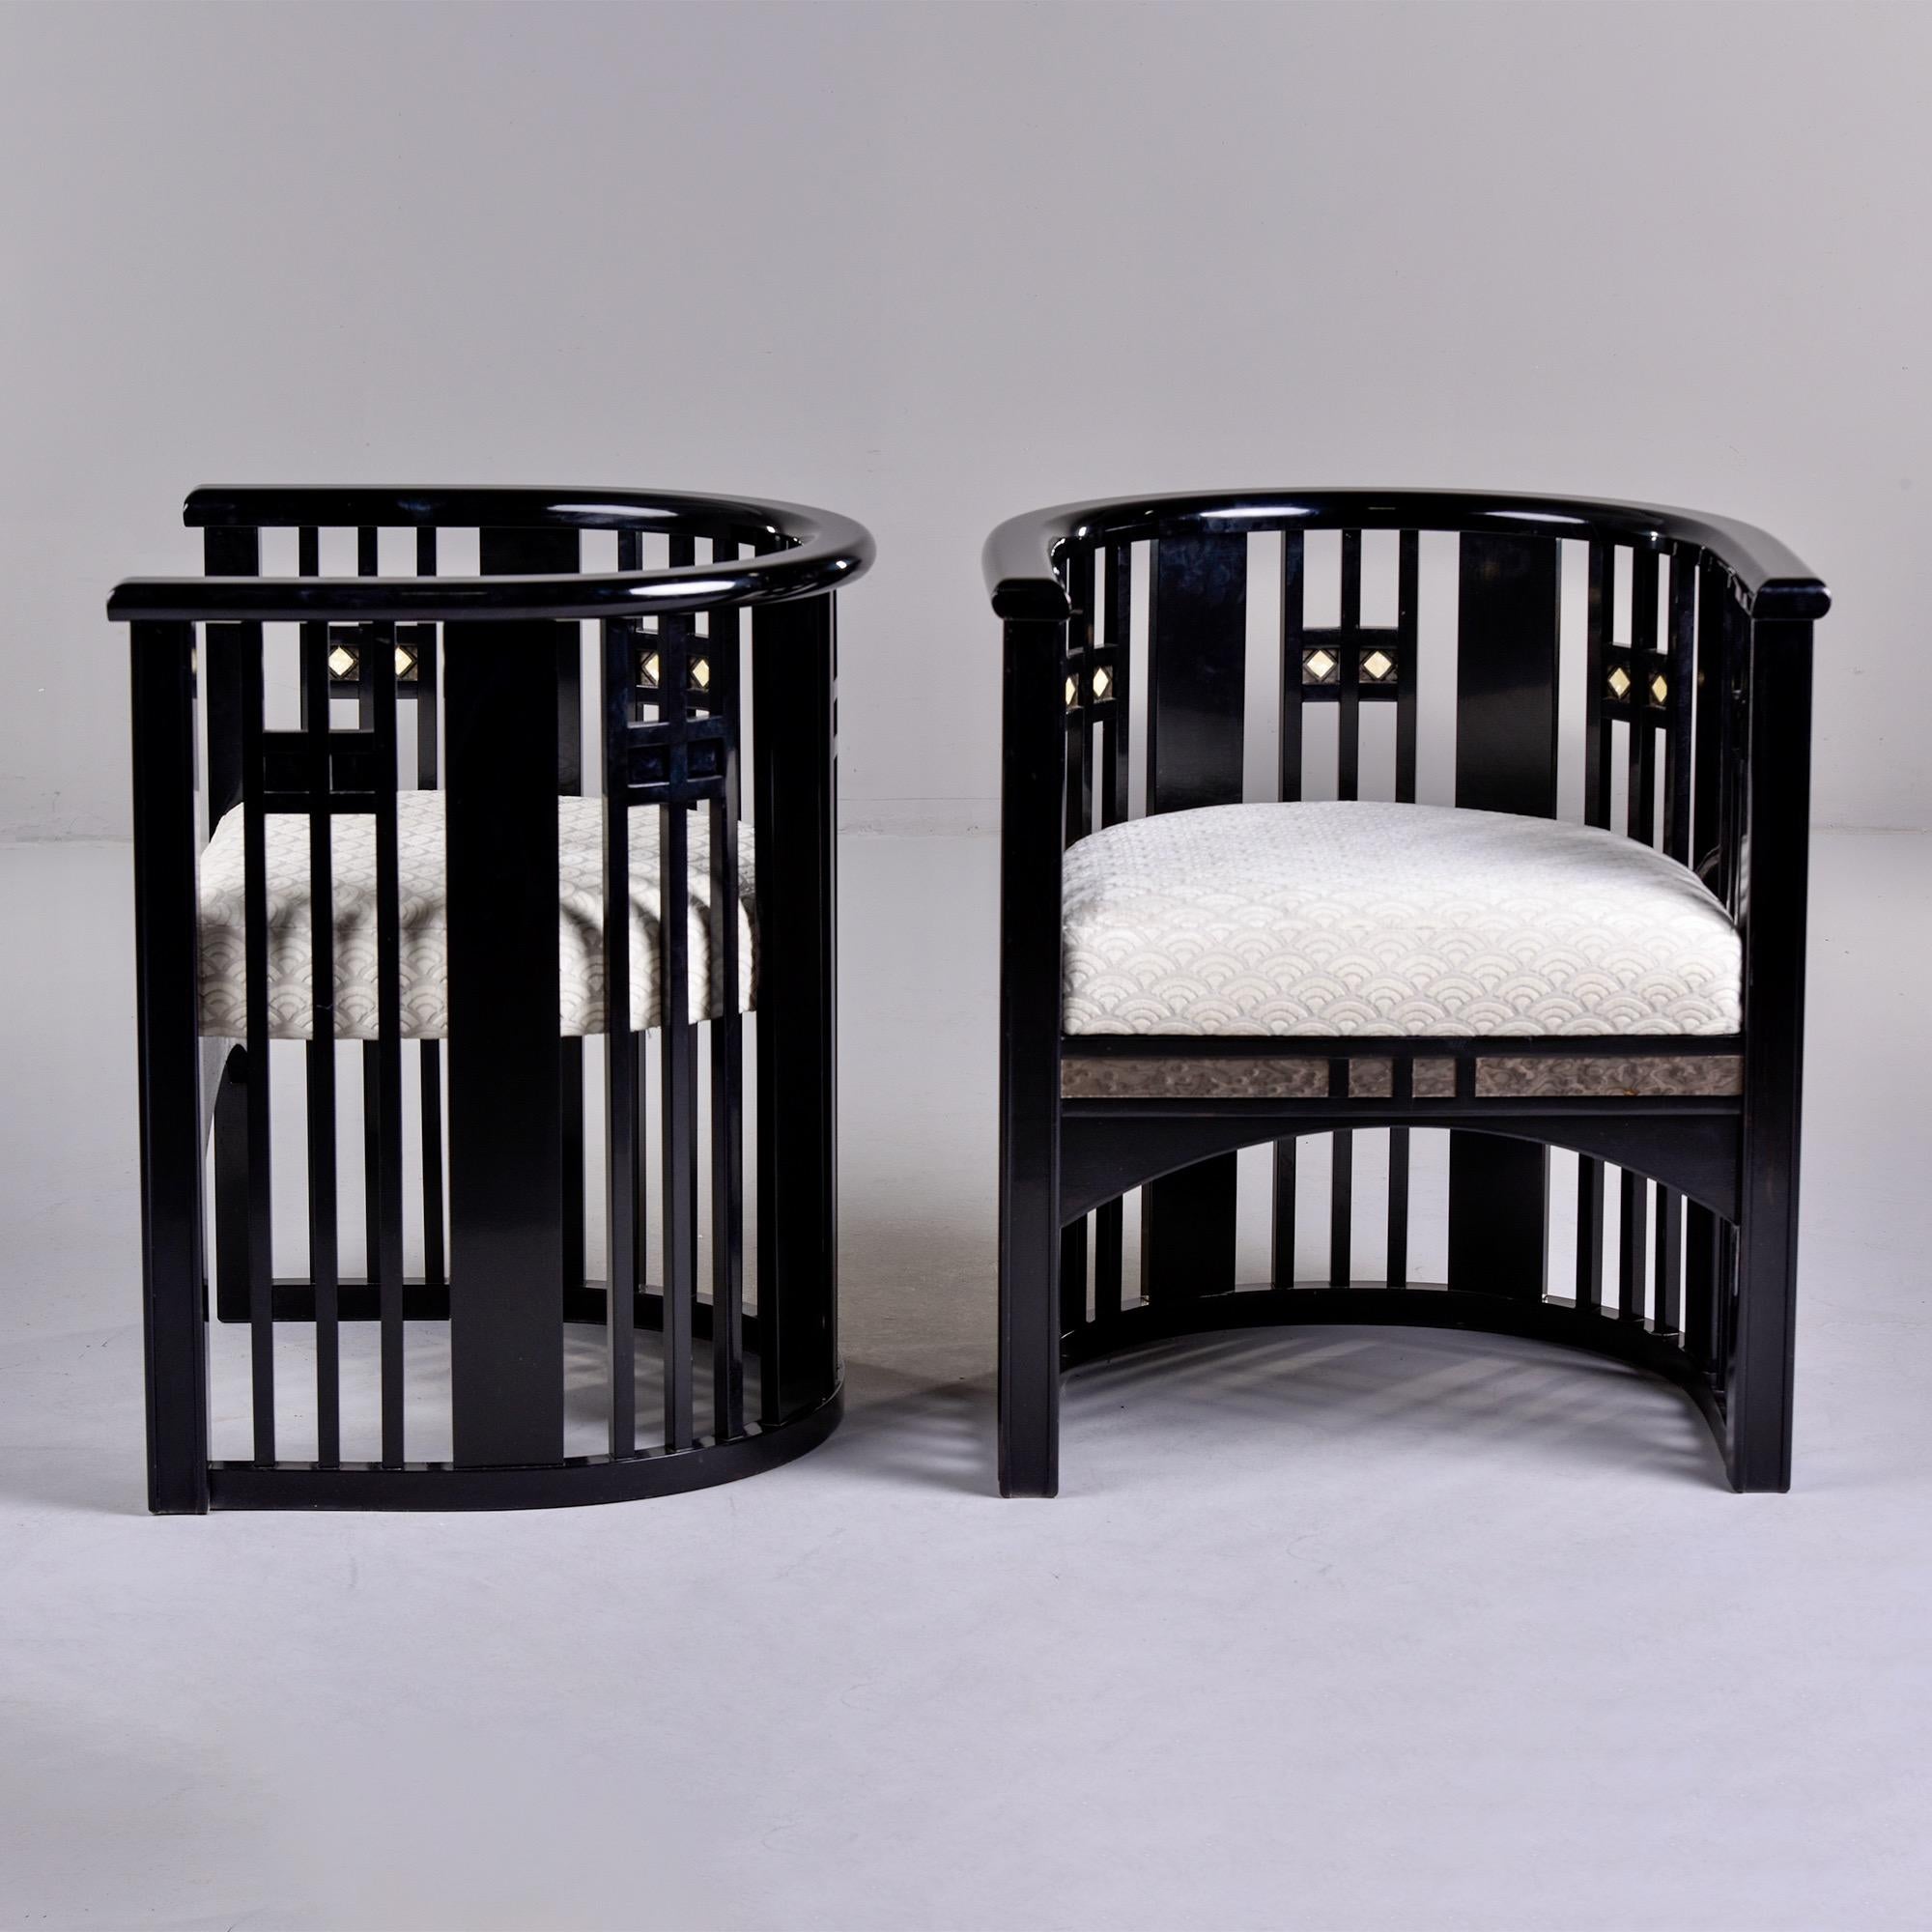 Pair of circa 1970s Josef Hoffmann style black lacquered chairs found in Italy. Seats have been recovered in Maxwell off-white textured velvet. Unknown maker. Sold and priced as a pair. 

Measures: Arm Height: 27.5” Seat Height: 18.5”
Seat Depth: